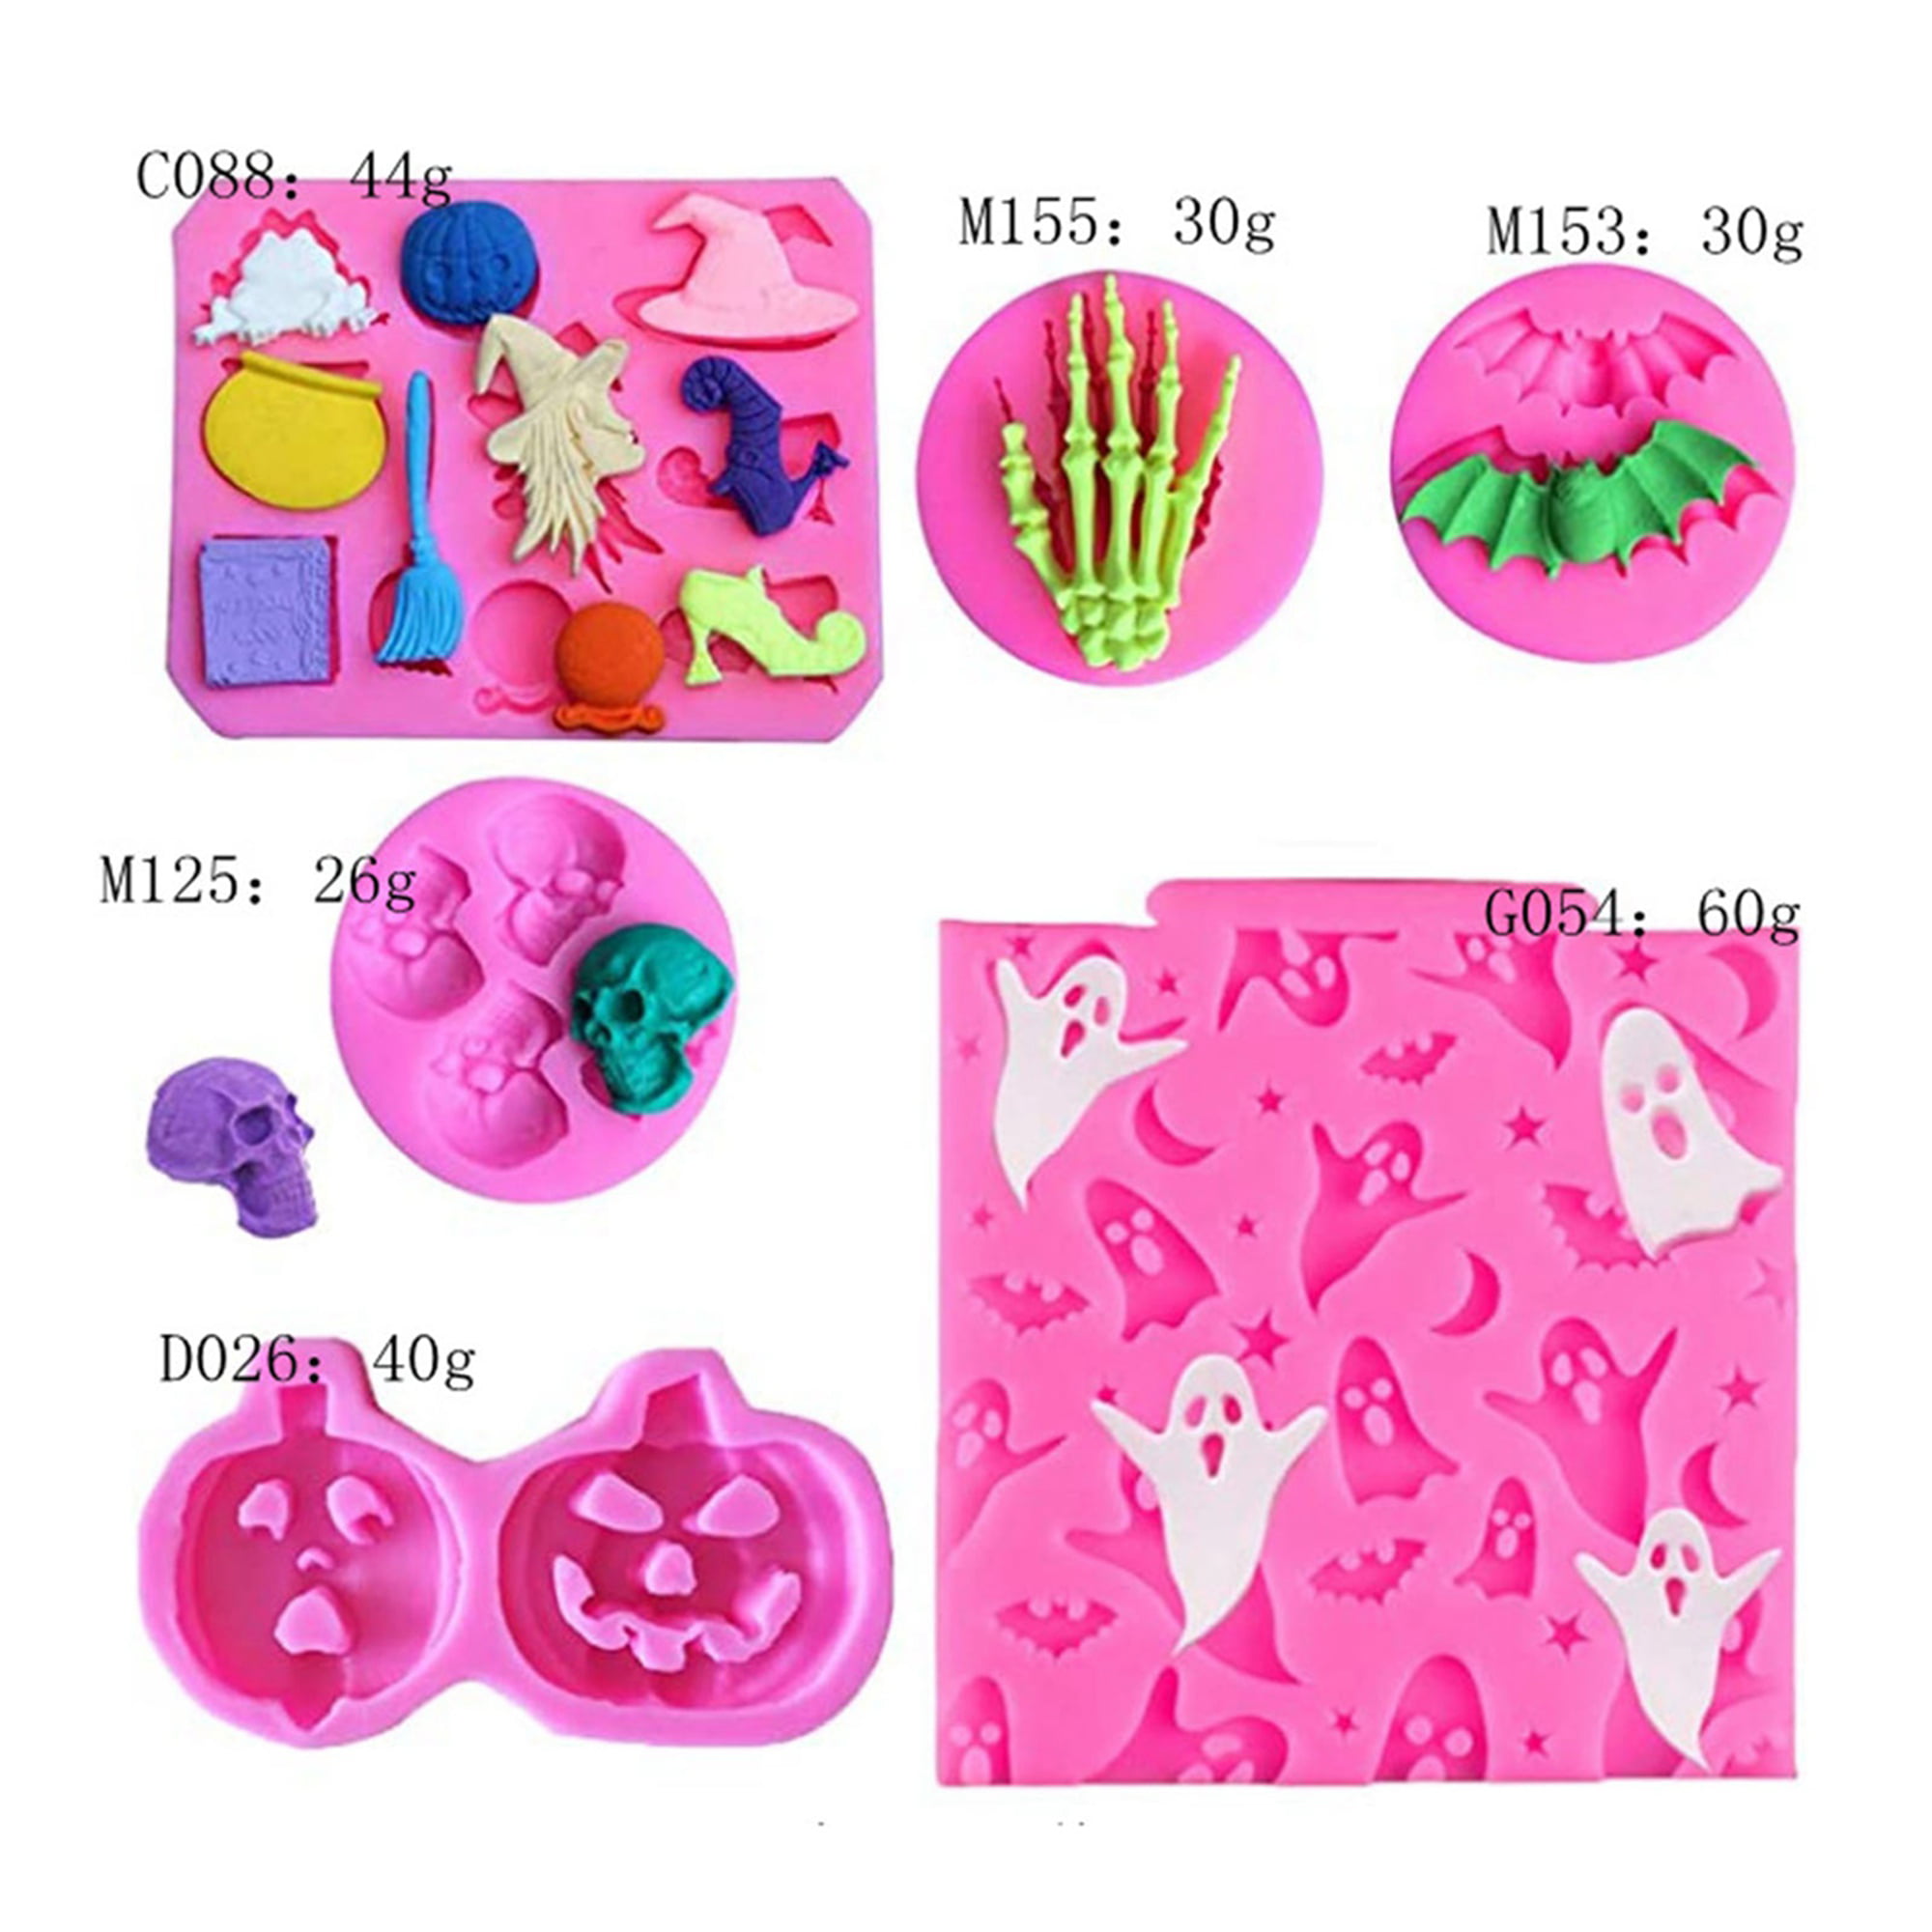 3D Silicone Halloween Bats Mould Chocolate Fondant Cake Baking Soap Resin Mold 